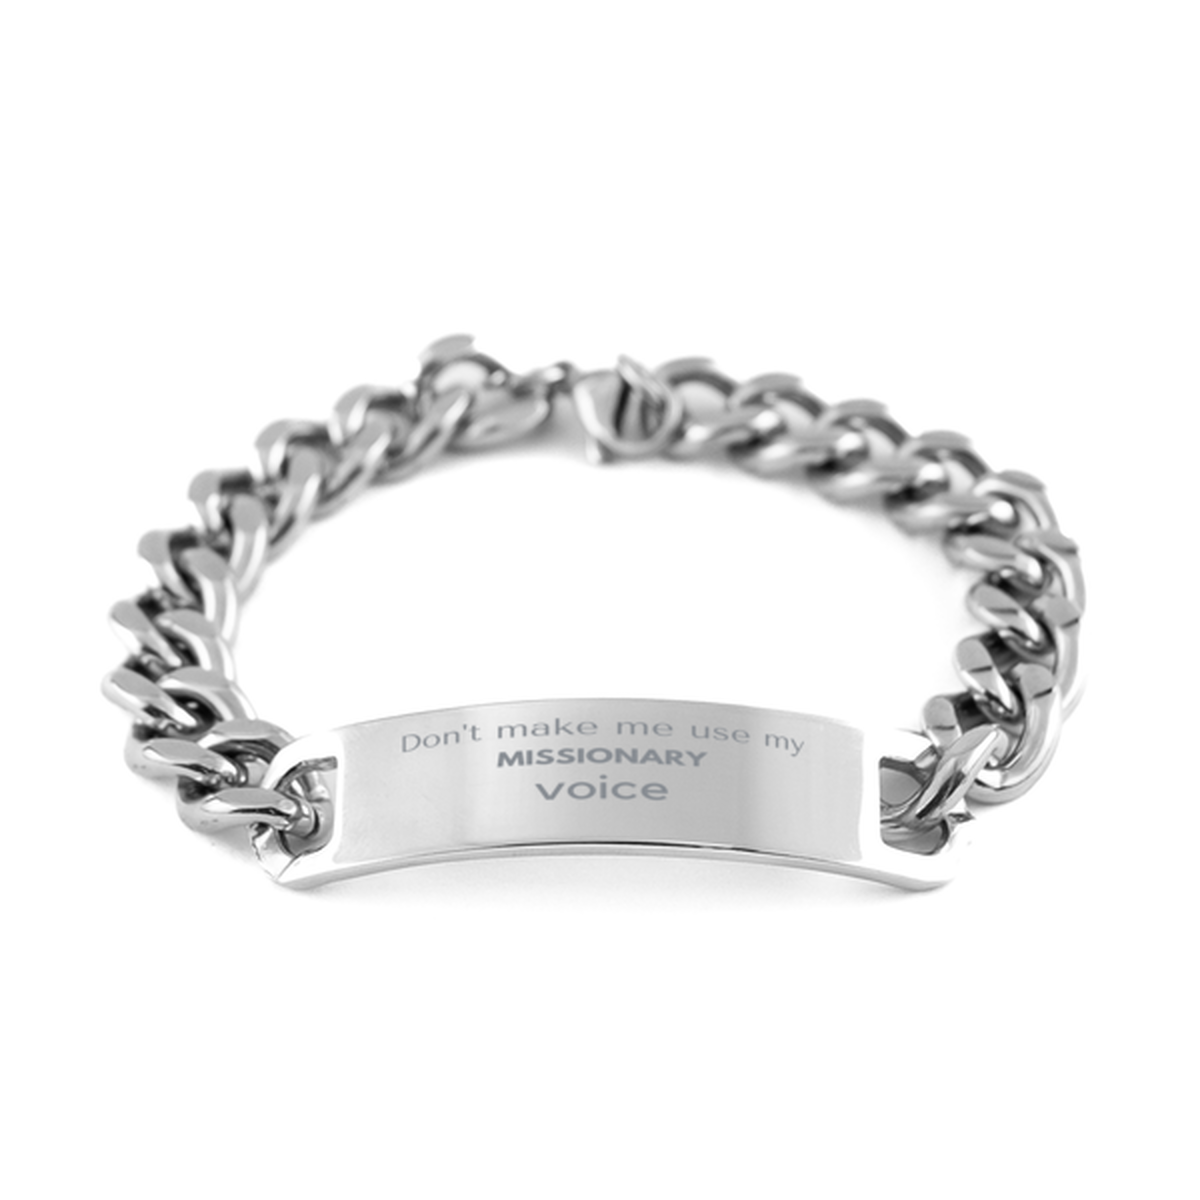 Don't make me use my Missionary voice, Sarcasm Missionary Gifts, Christmas Missionary Cuban Chain Stainless Steel Bracelet Birthday Unique Gifts For Missionary Coworkers, Men, Women, Colleague, Friends